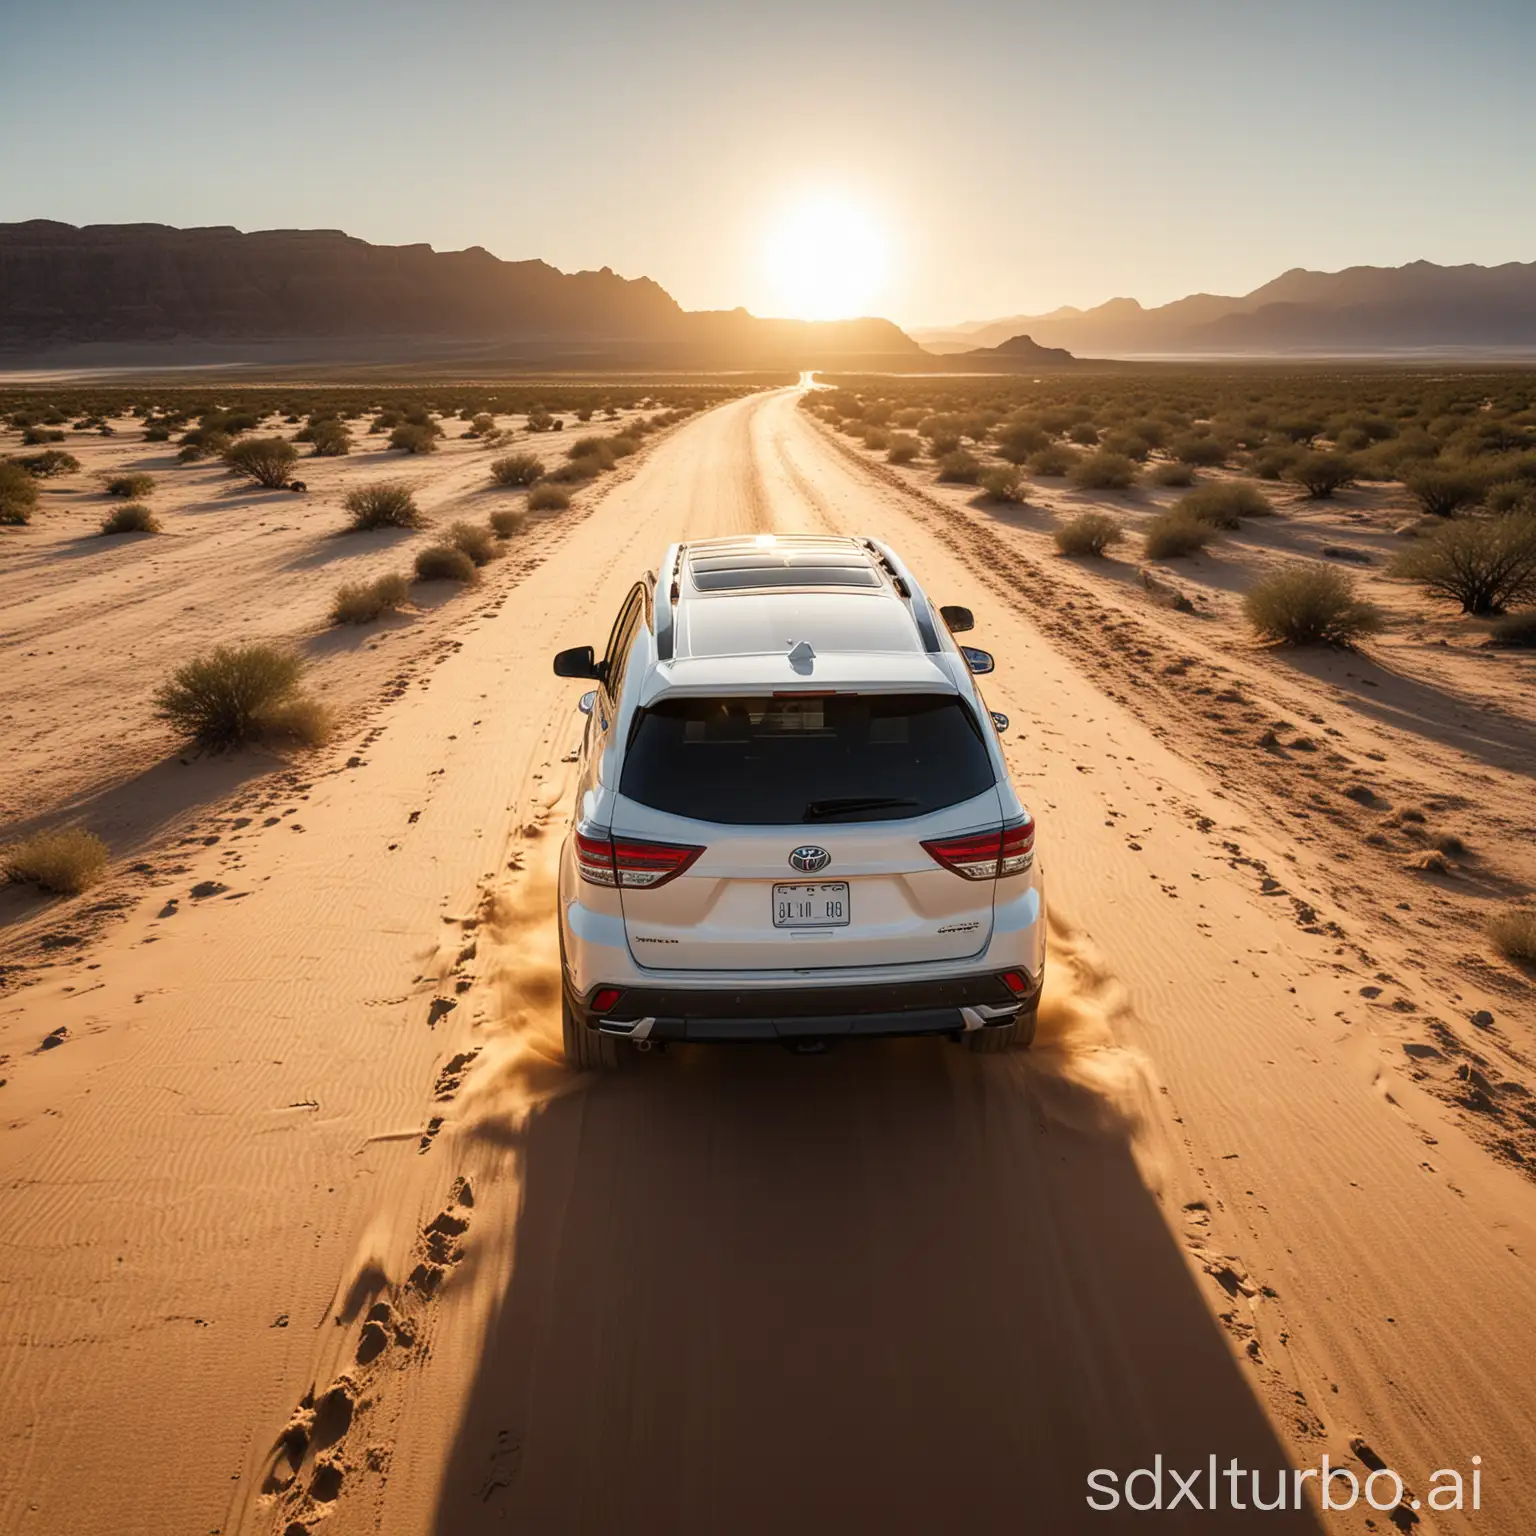 A white Toyota Highlander traverses through a golden desert, with the sun casting direct light on the dunes, creating a stark interplay of light and shadow. The vehicle leaves deep ruts in the sandy terrain, surrounded by the occasional hardy desert flora. The sky is a clear azure, contrasting sharply with the white of the car. Under the intense sunlight, the Highlander's metallic finish reflects a dazzling light, while the distant horizon is tinged with a faint orange-red, signaling the approach of sunset. The entire scene evokes a sense of adventure and freedom.